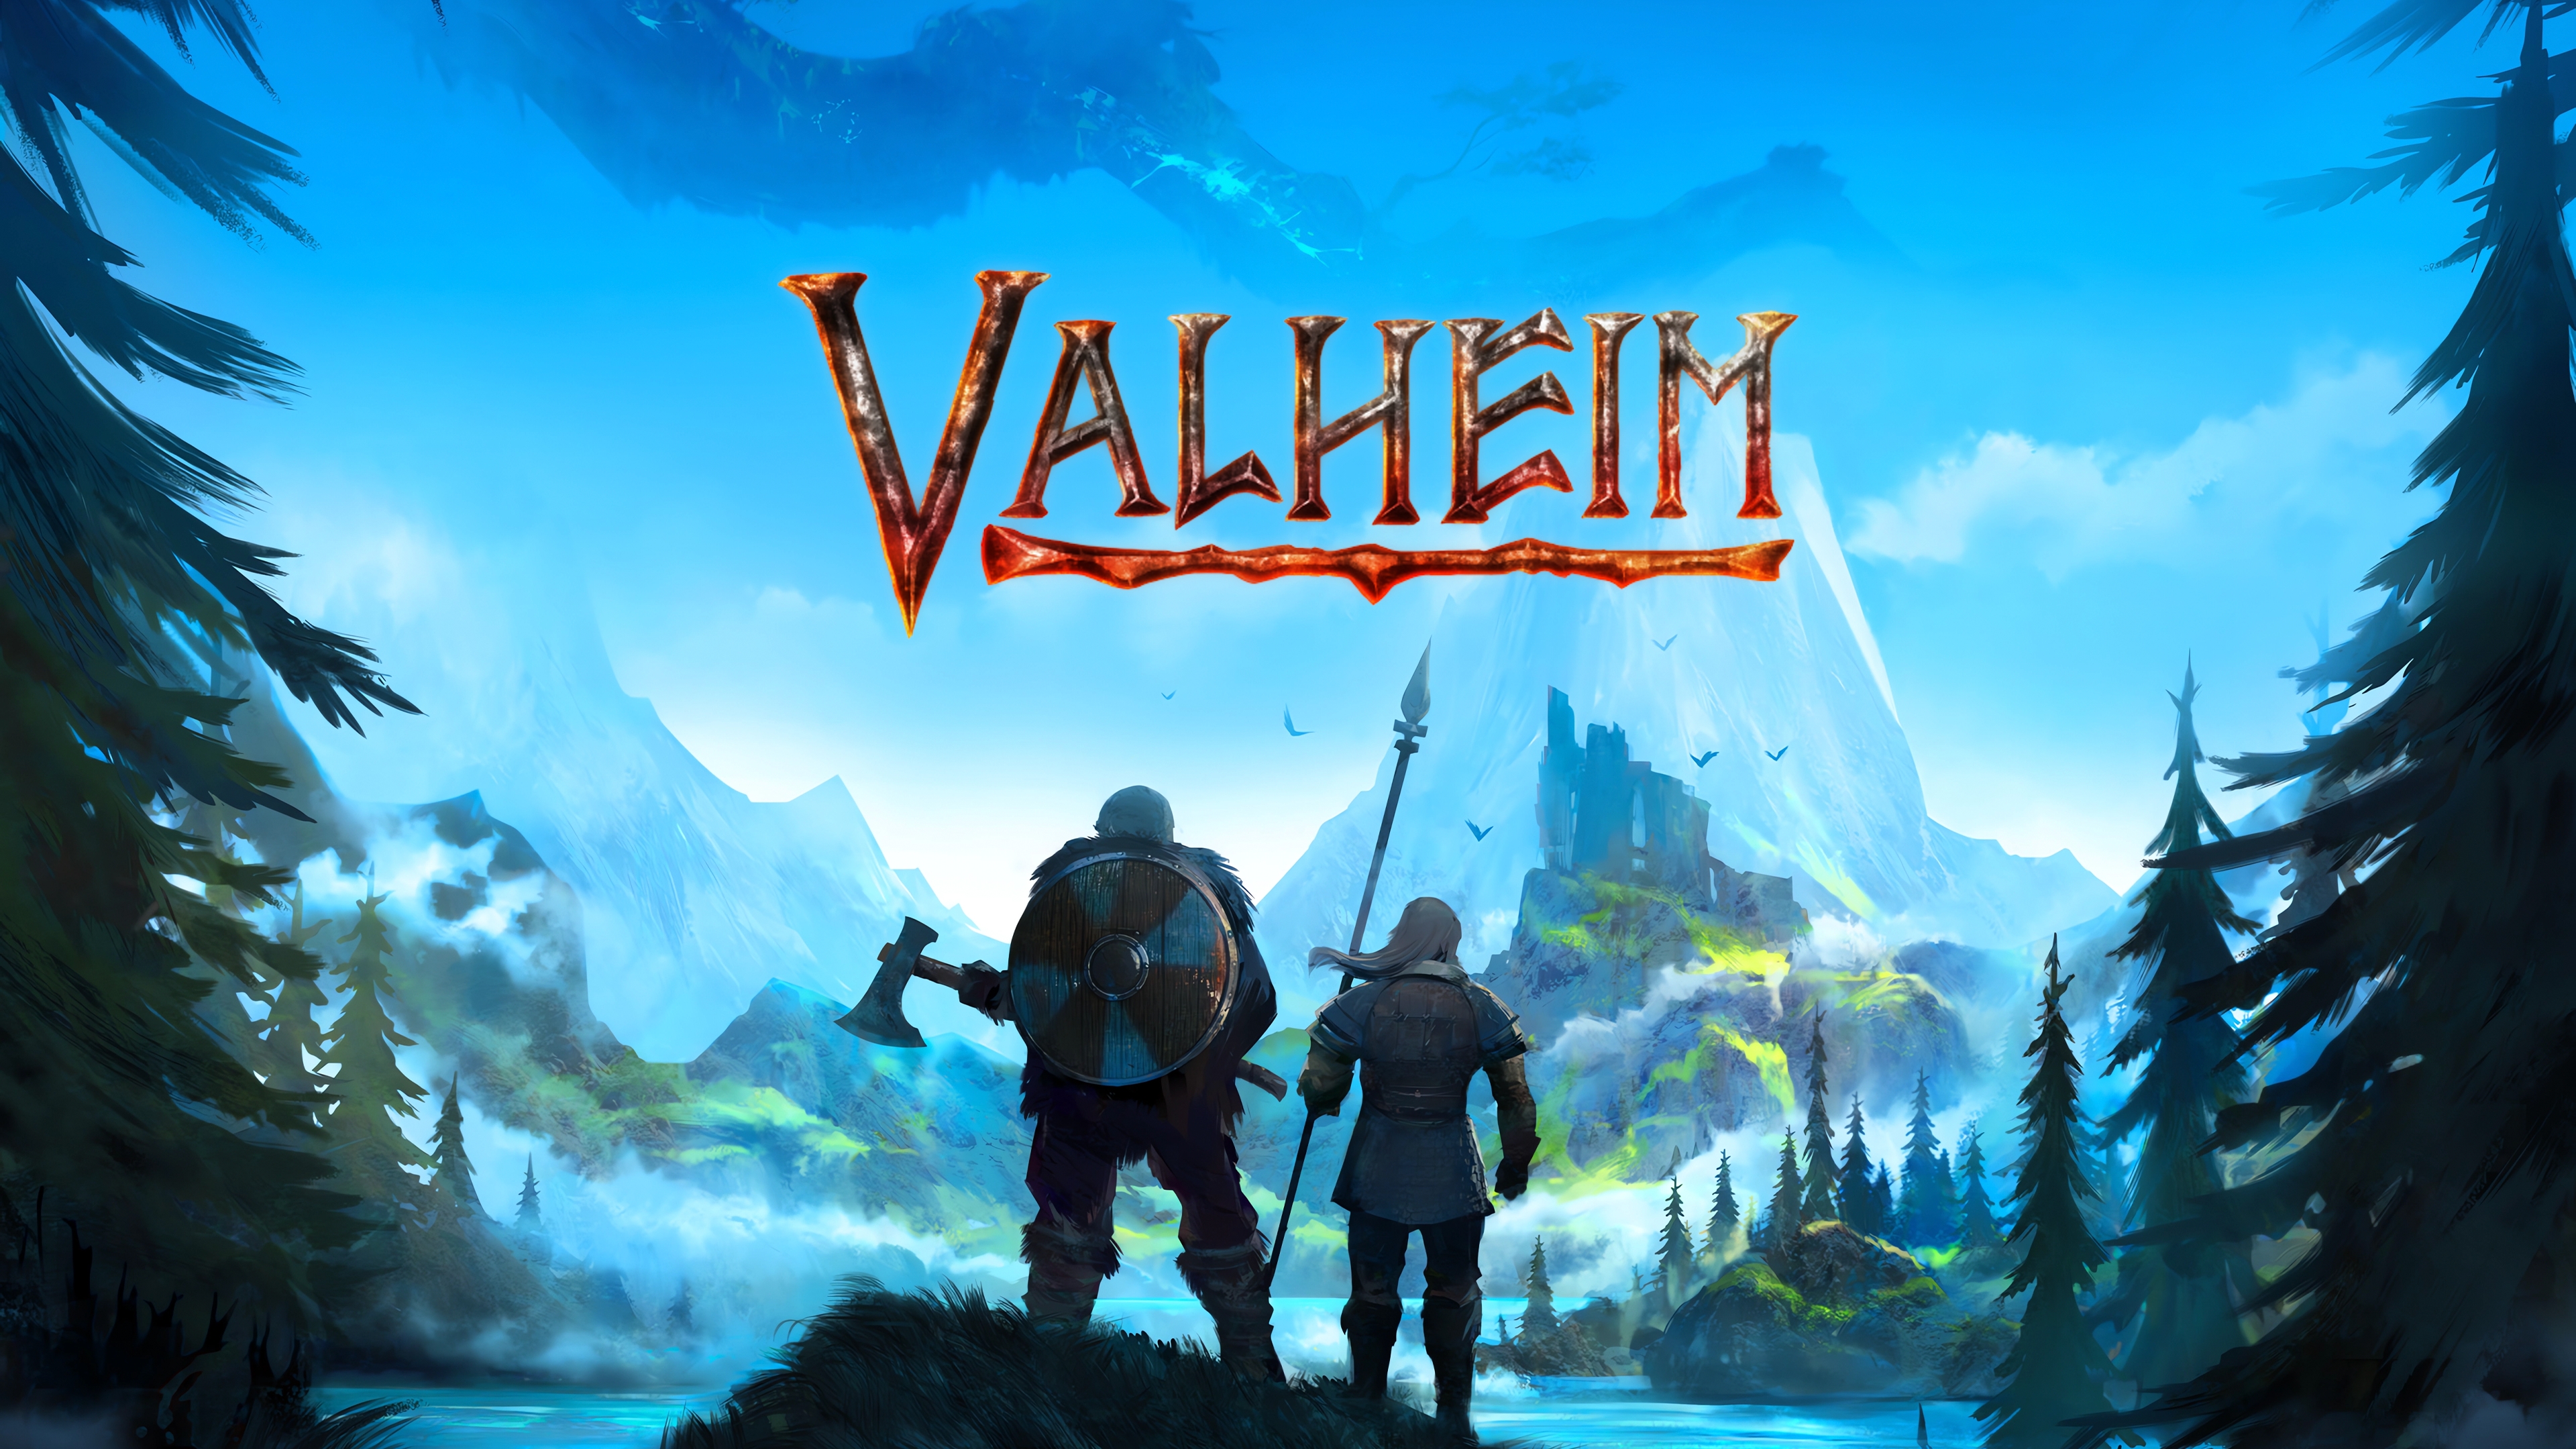 Valheim game's two character holding their weapons in game preview